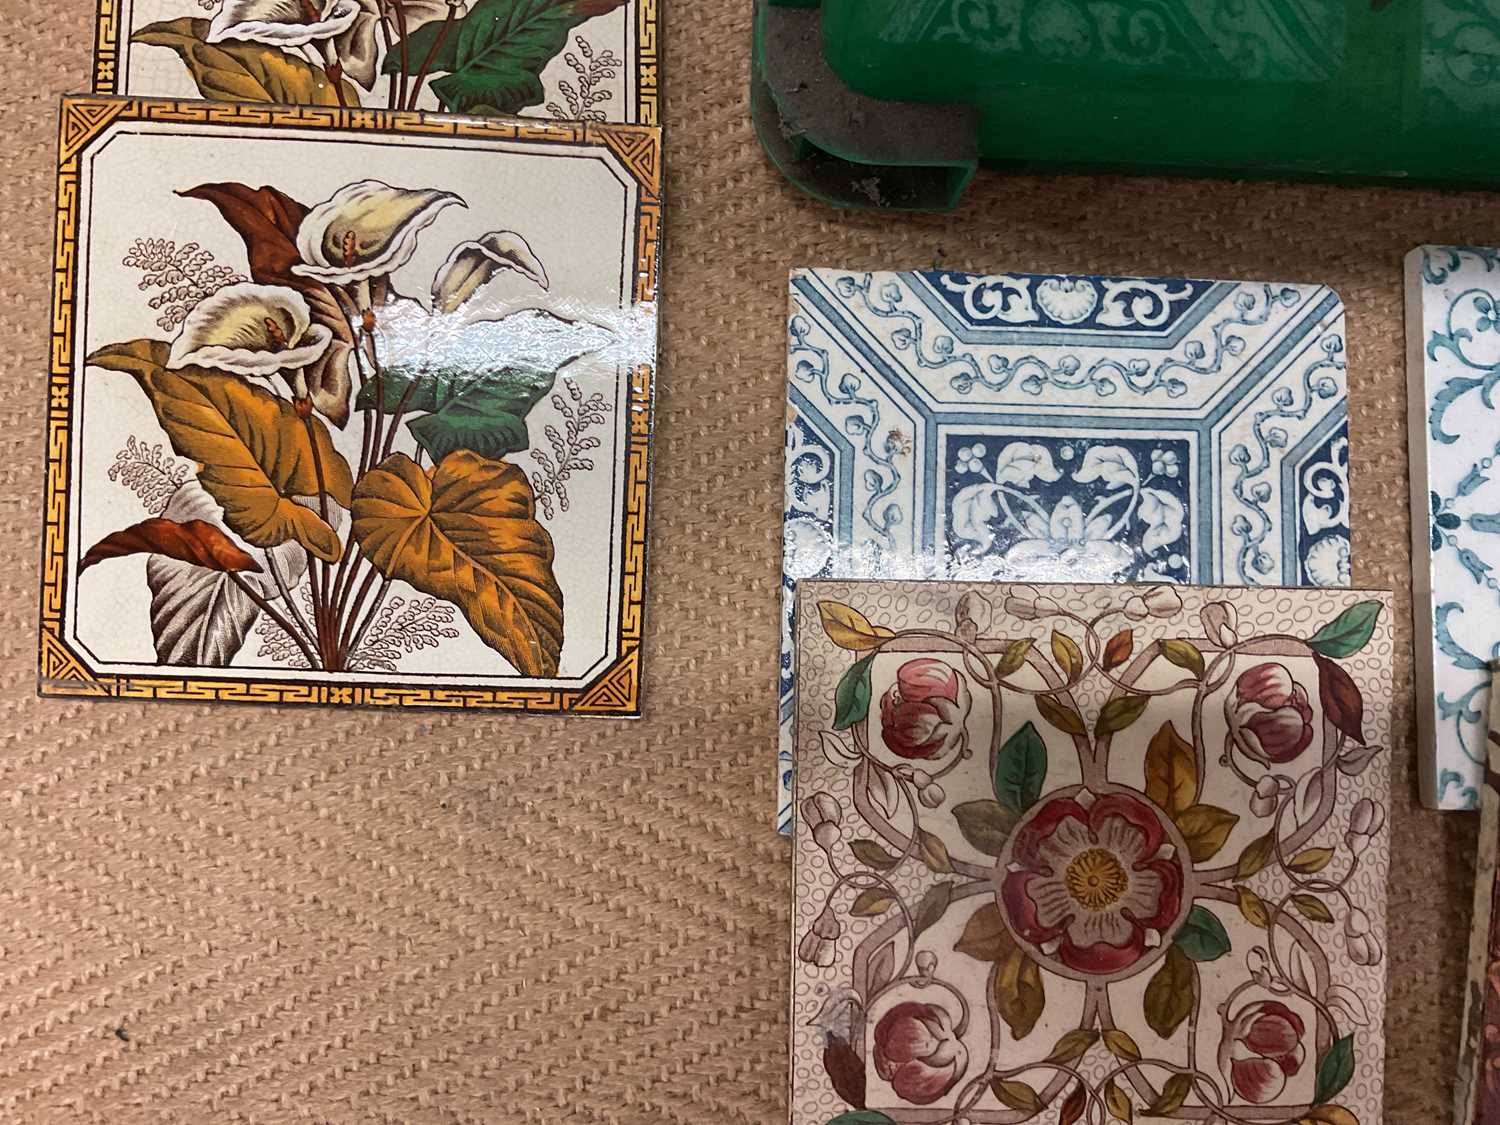 A quantity of 19th century tiles with various floral patterns, each 15.5 x 15.5cm. - Image 3 of 4